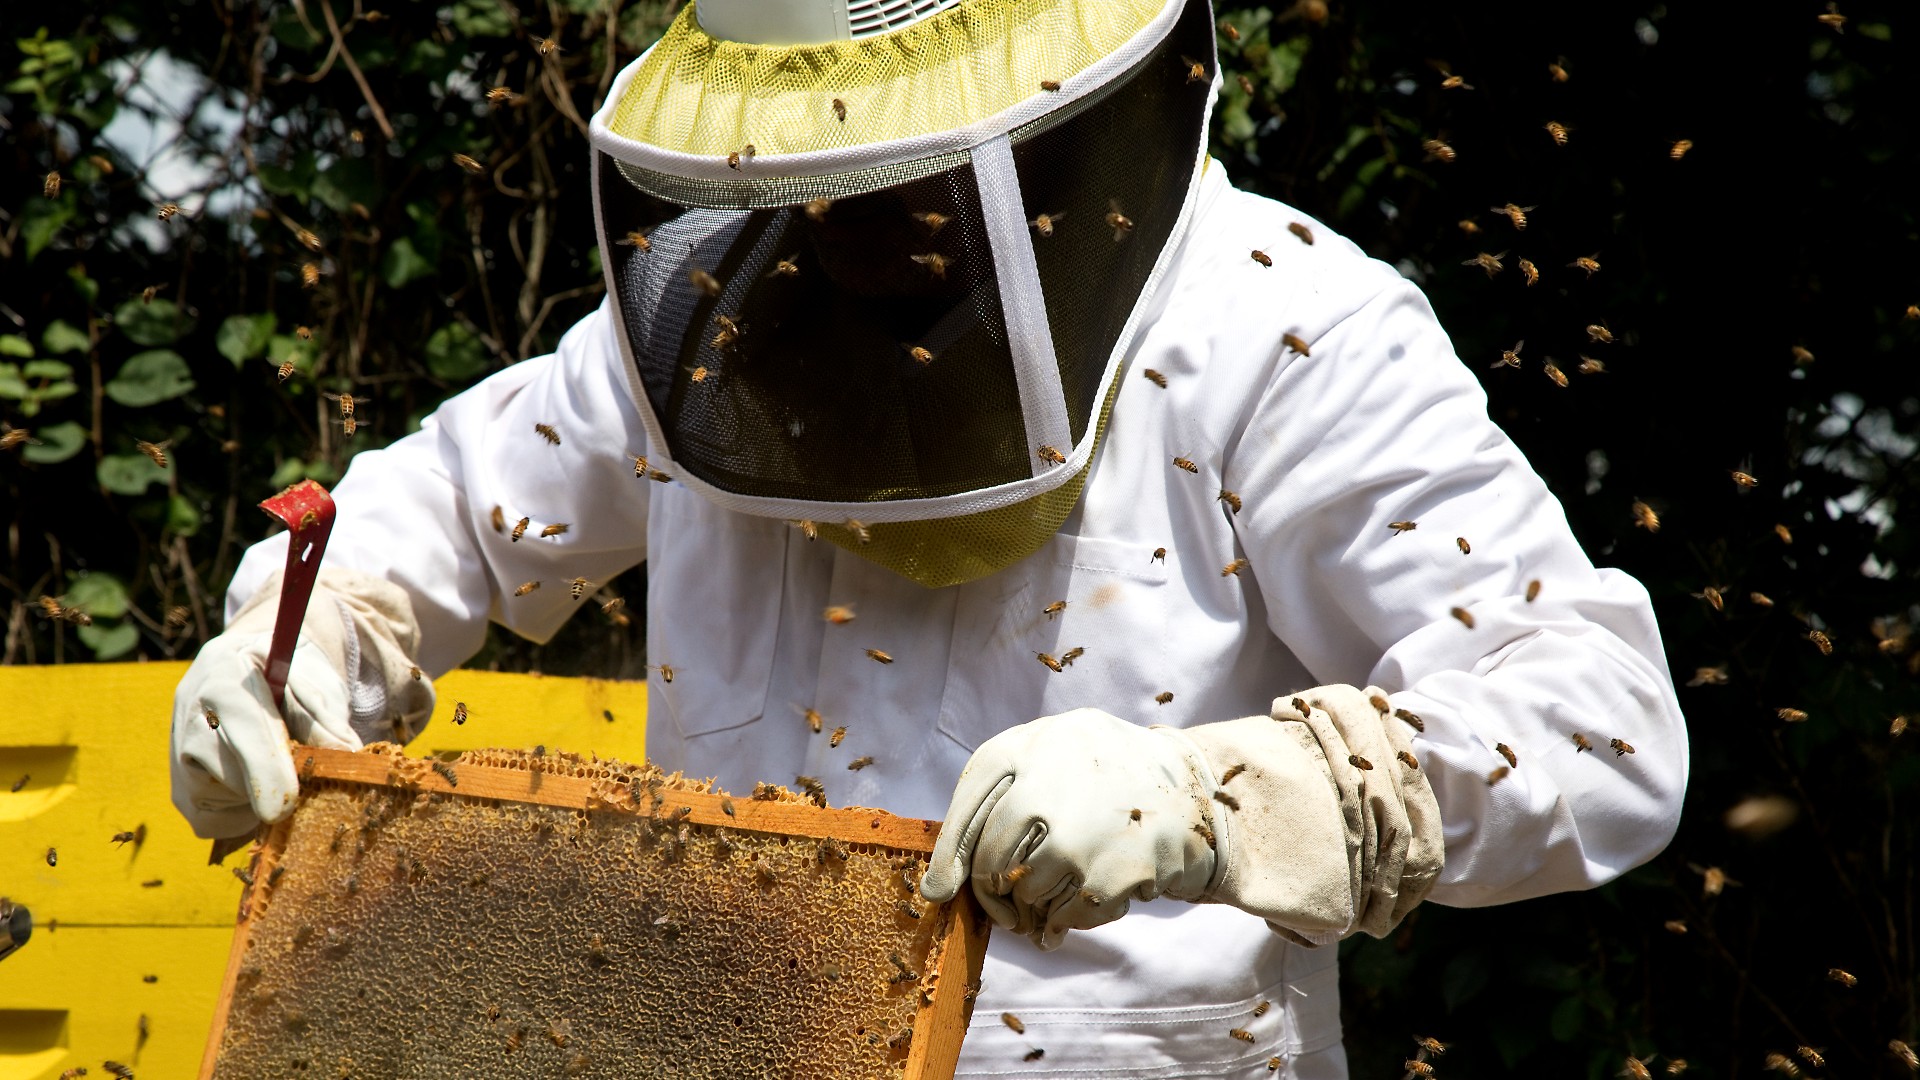 Here we see a beekeeper wearing a white protective bee suit.  They hold a honeycomb in front of them, surrounded by a swarm of bees.